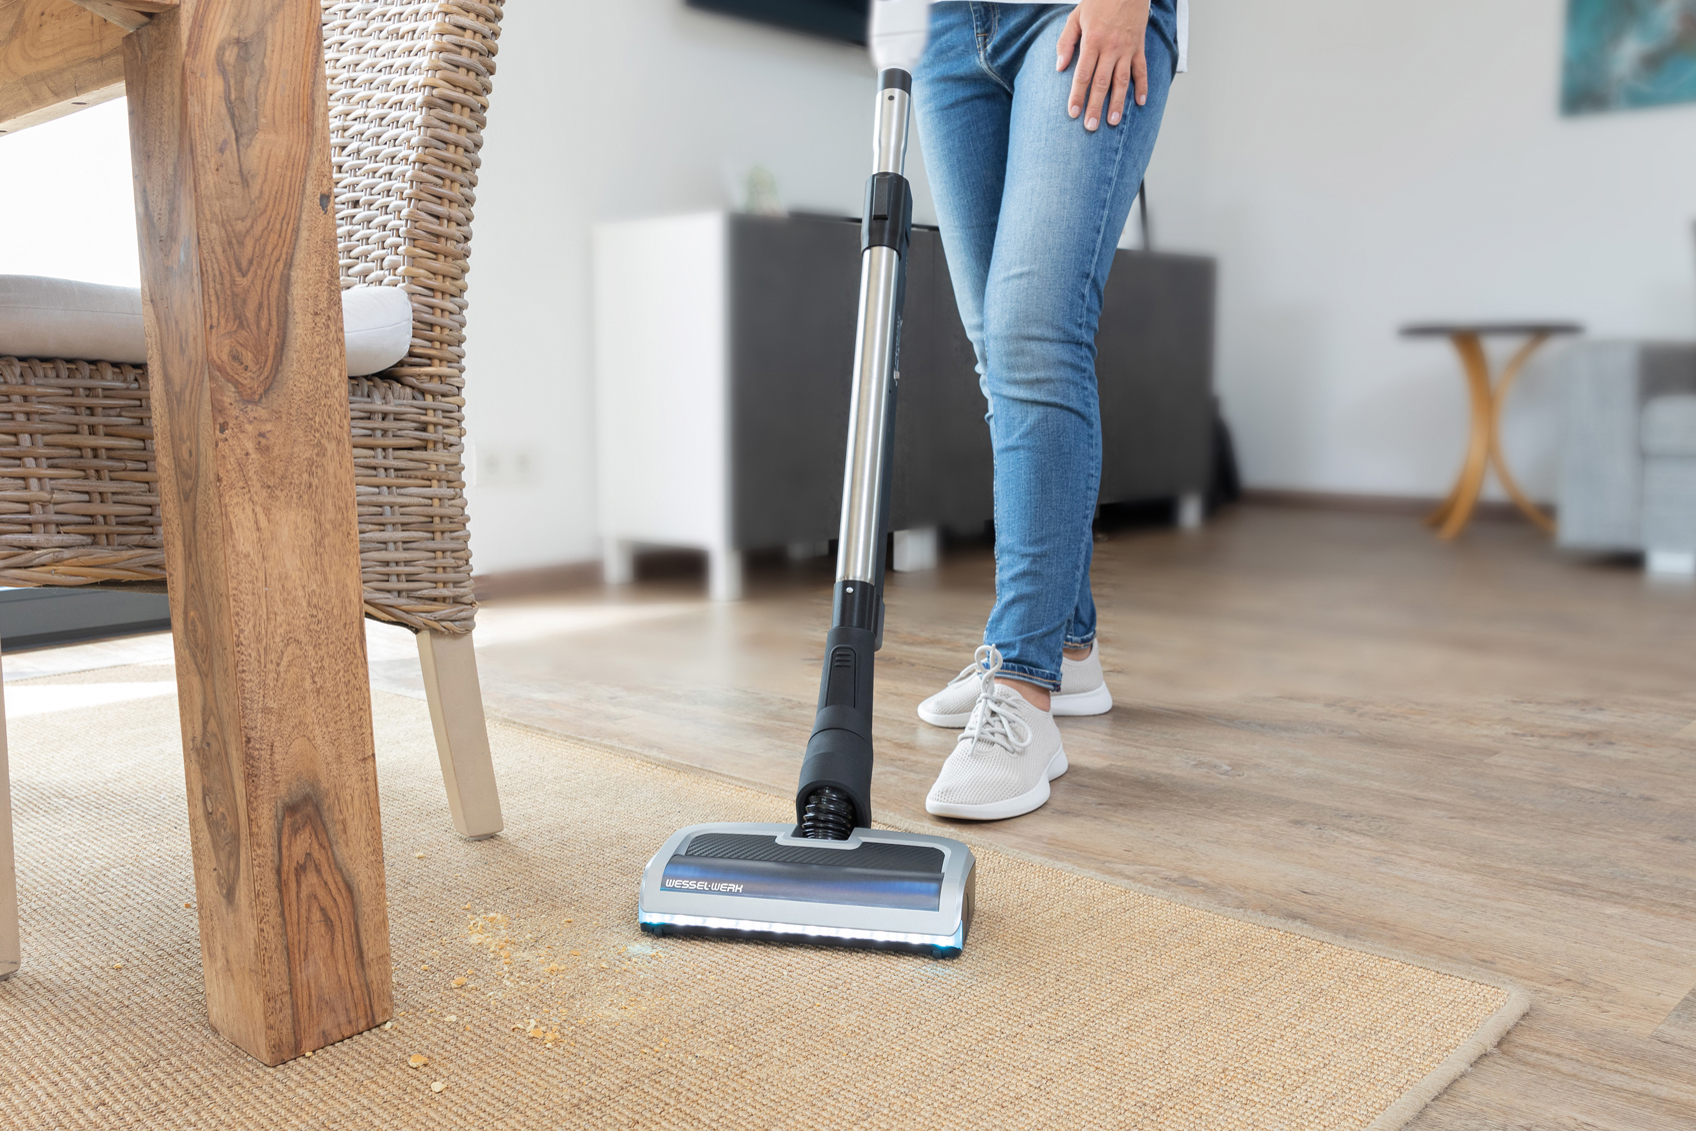 WesselWerk launch innovative new products  set to make cleaning easier and more efficient